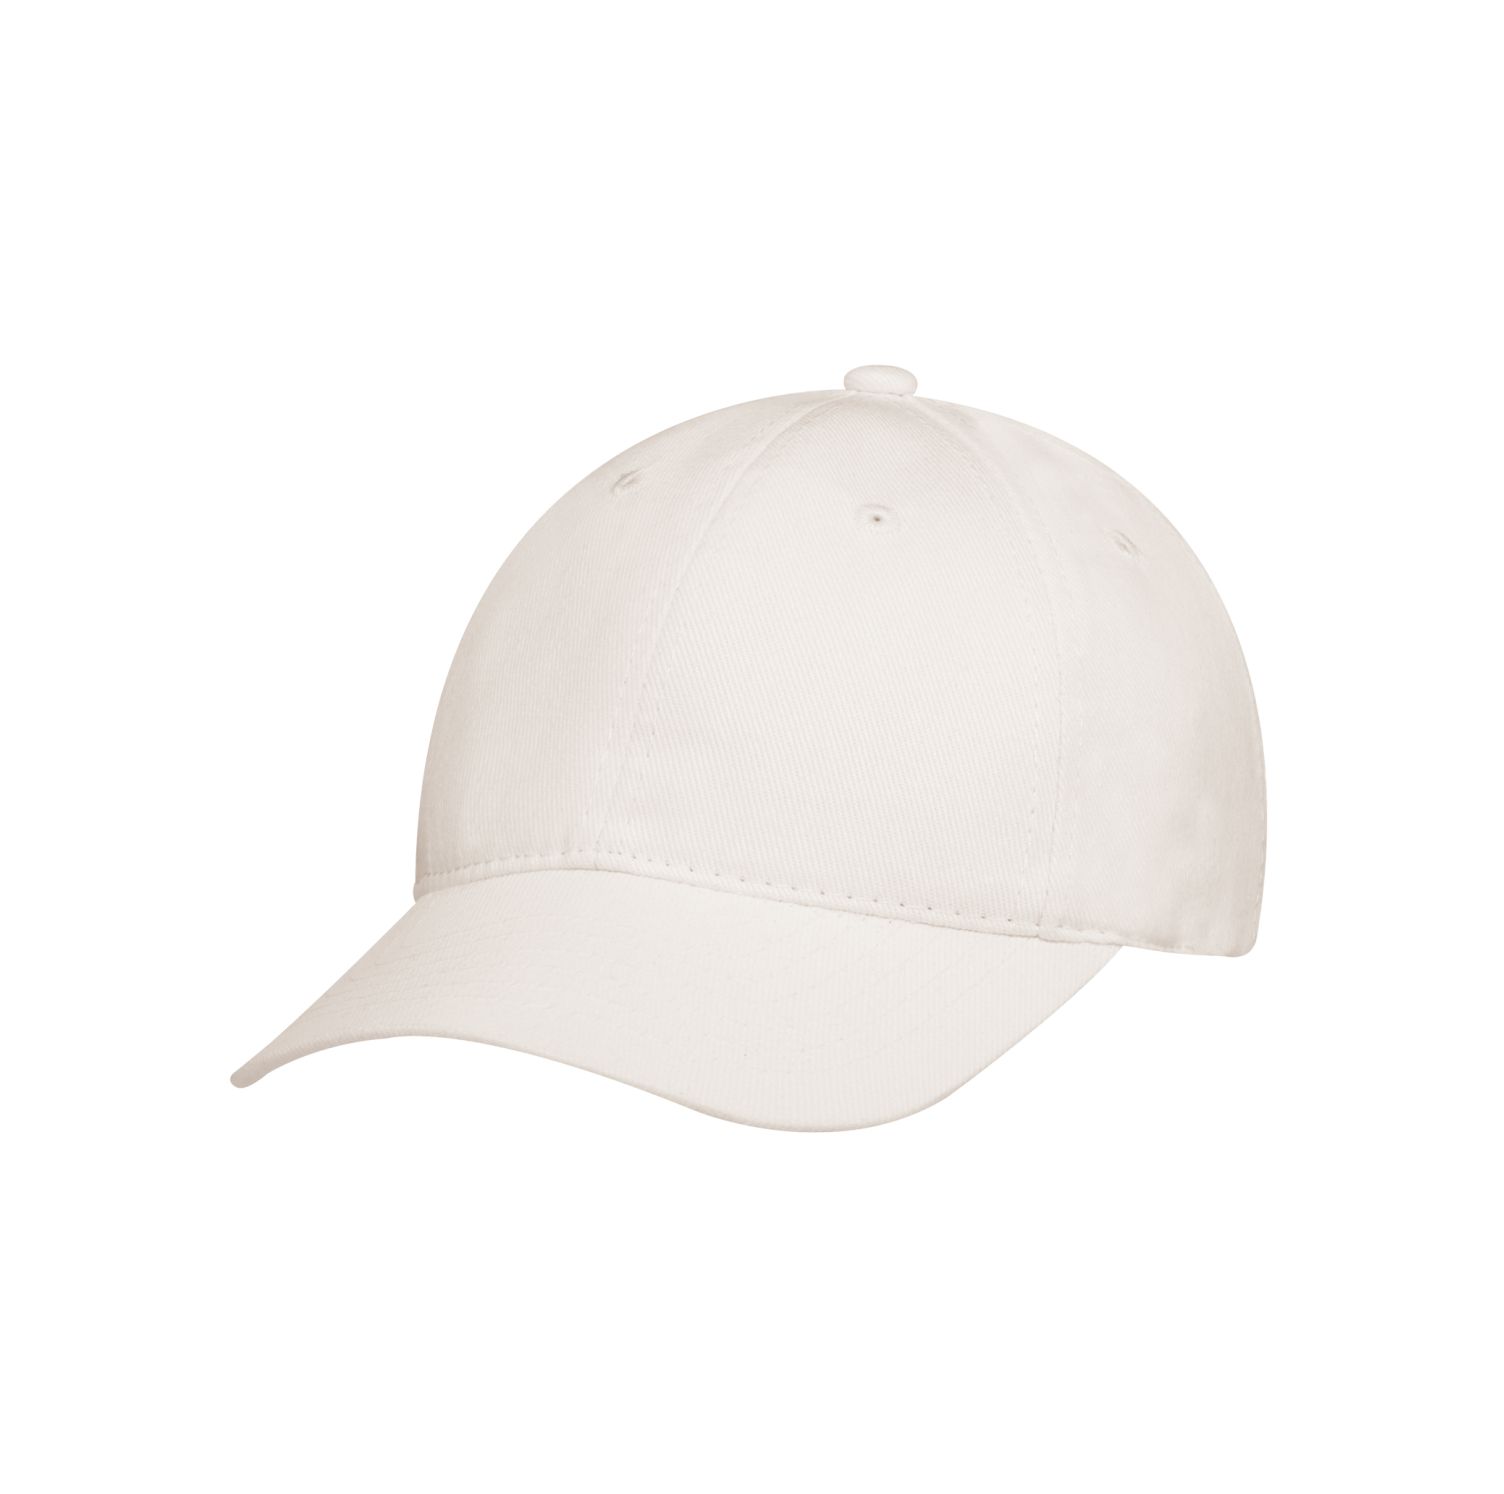 AJM Heavyweight Brushed Cotton Drill 6 Panel Constructed Contour Hat #2C390M Stone